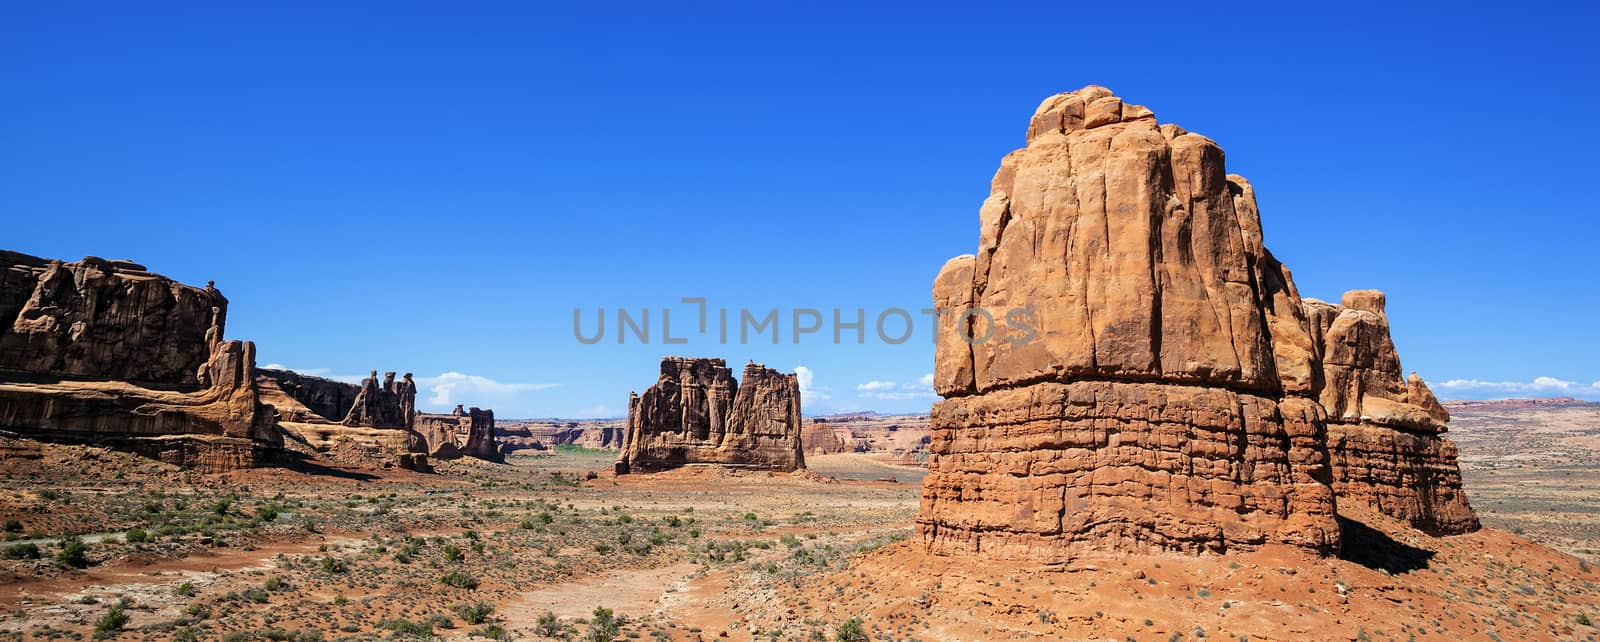 Panoramic view of famous Red Rock formations, located in Arches National Park in Moab, Utah 